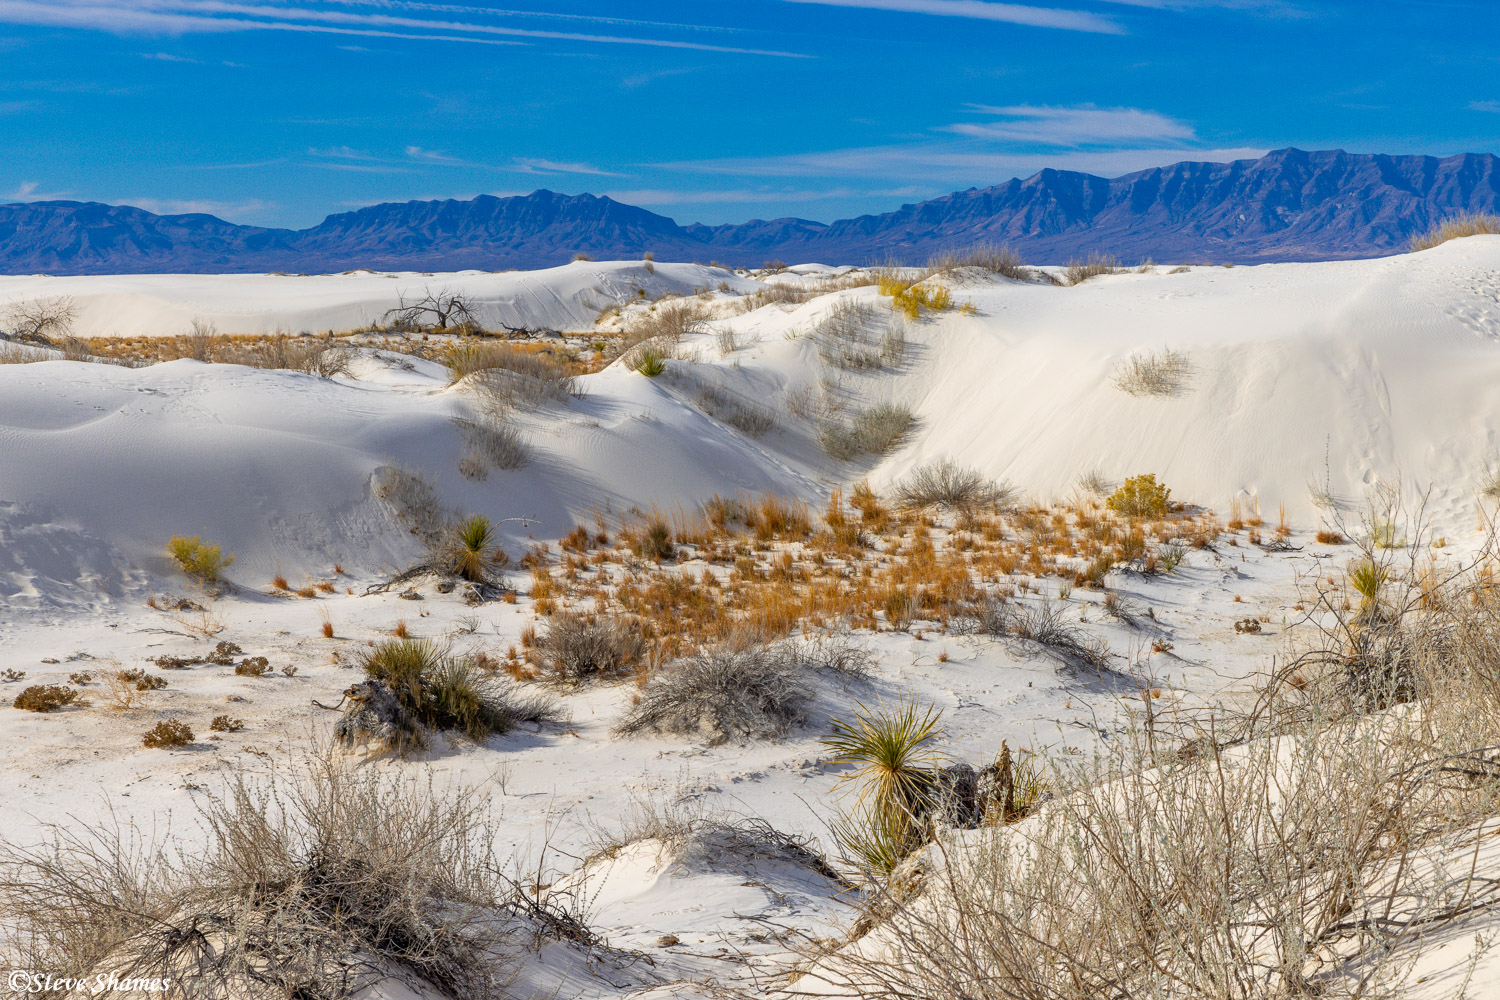 A typical scene at White Sands National Monument.